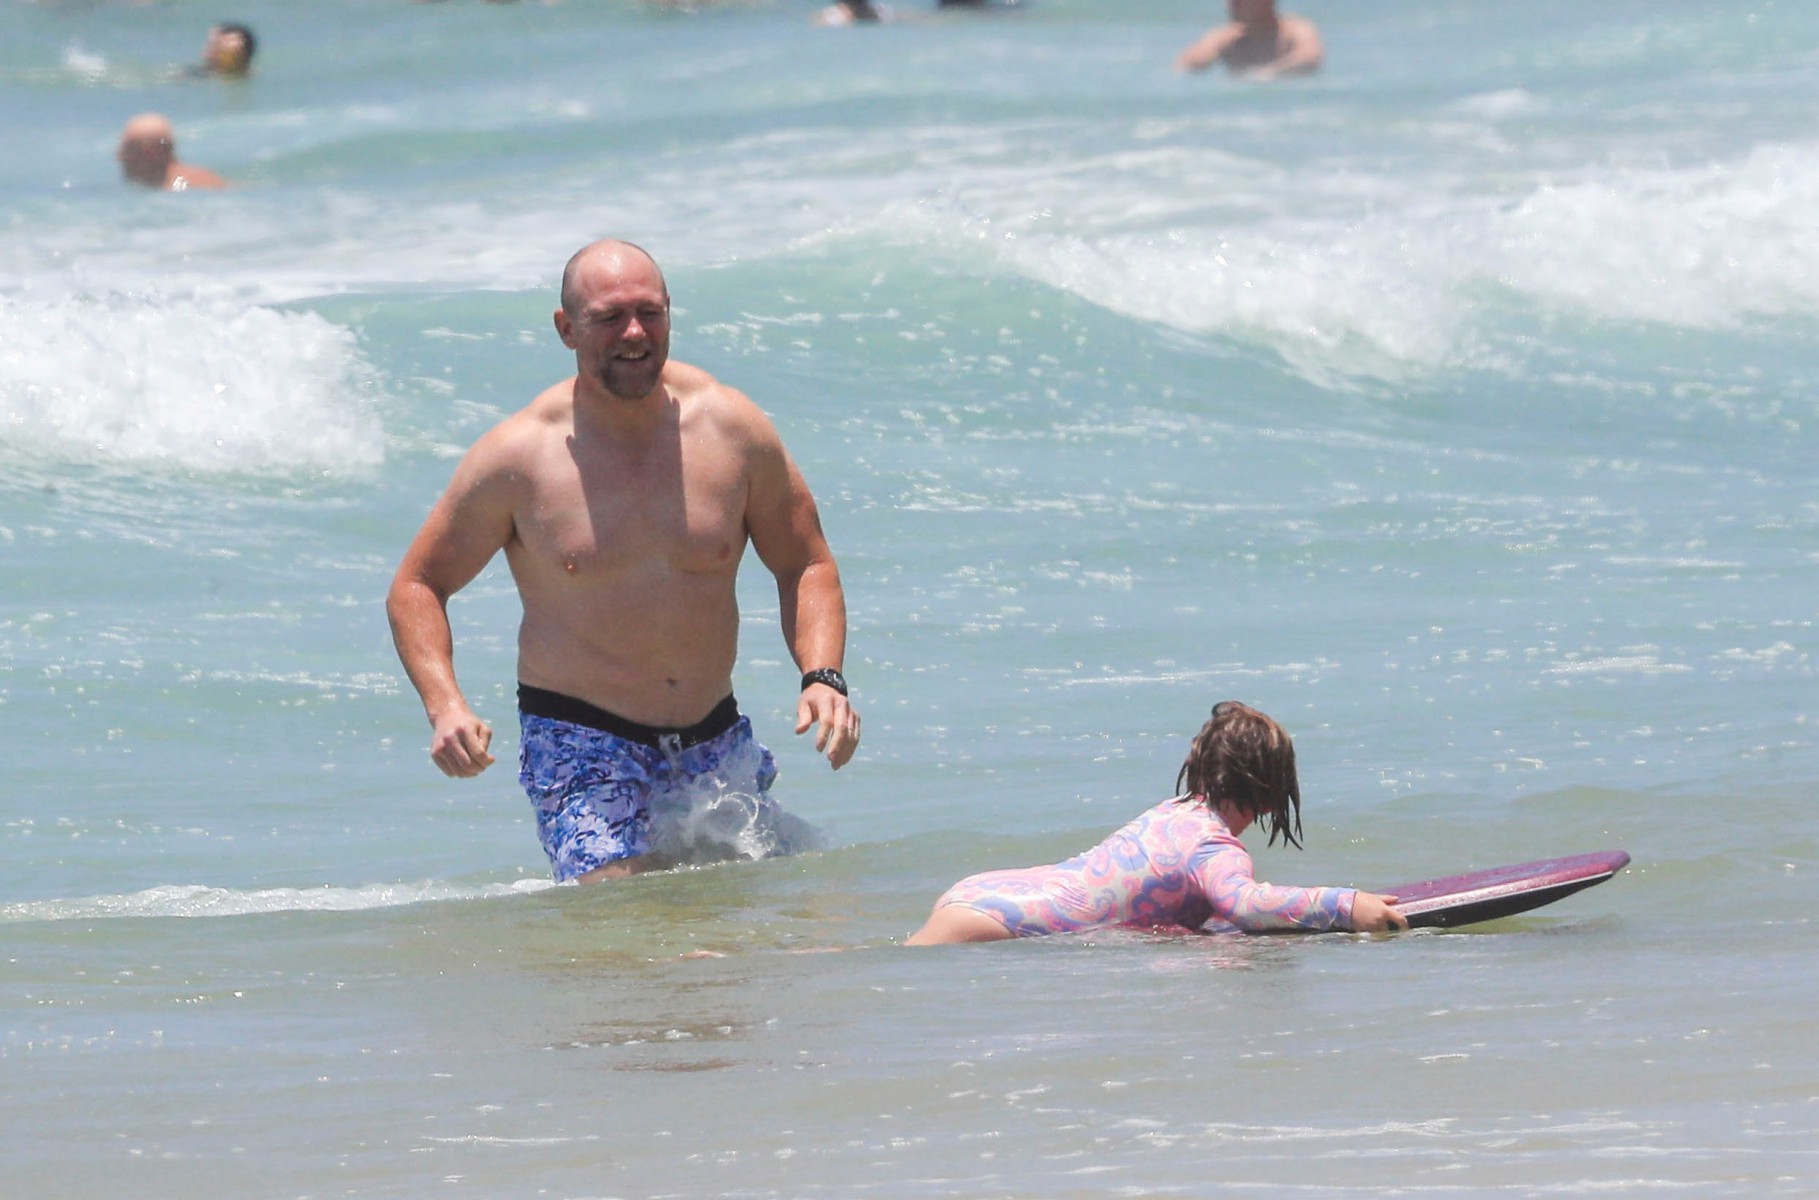 The ex-rugby star tried to teach daughter Mia how to catch some waves